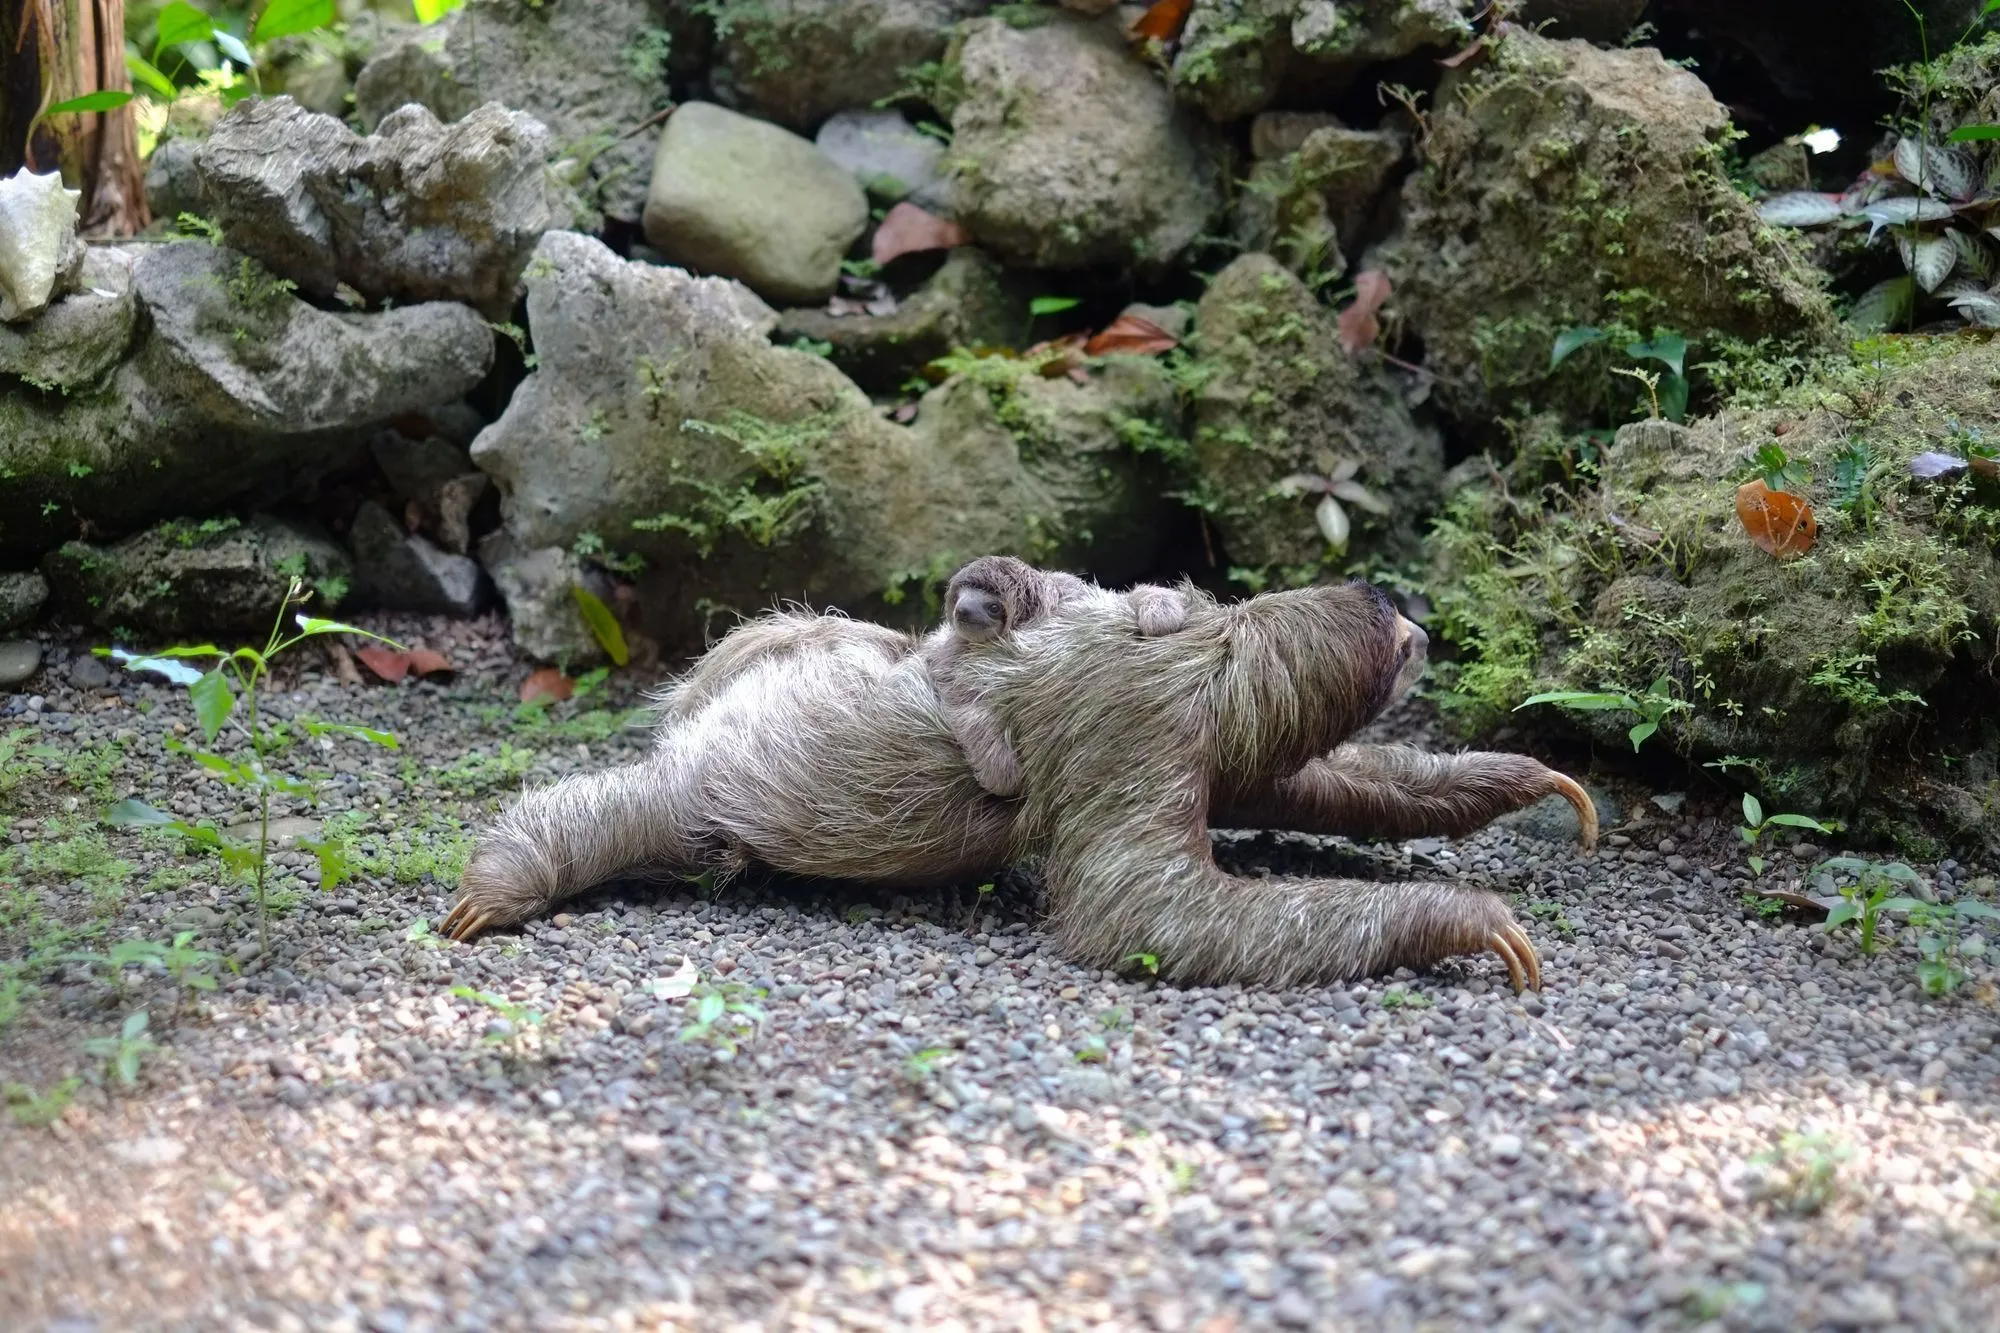 The pygmy three-toed sloth can only be found on a remote island near the coast of Panama, and its current population numbers make it Critically Endangered according to the IUCN Red List.